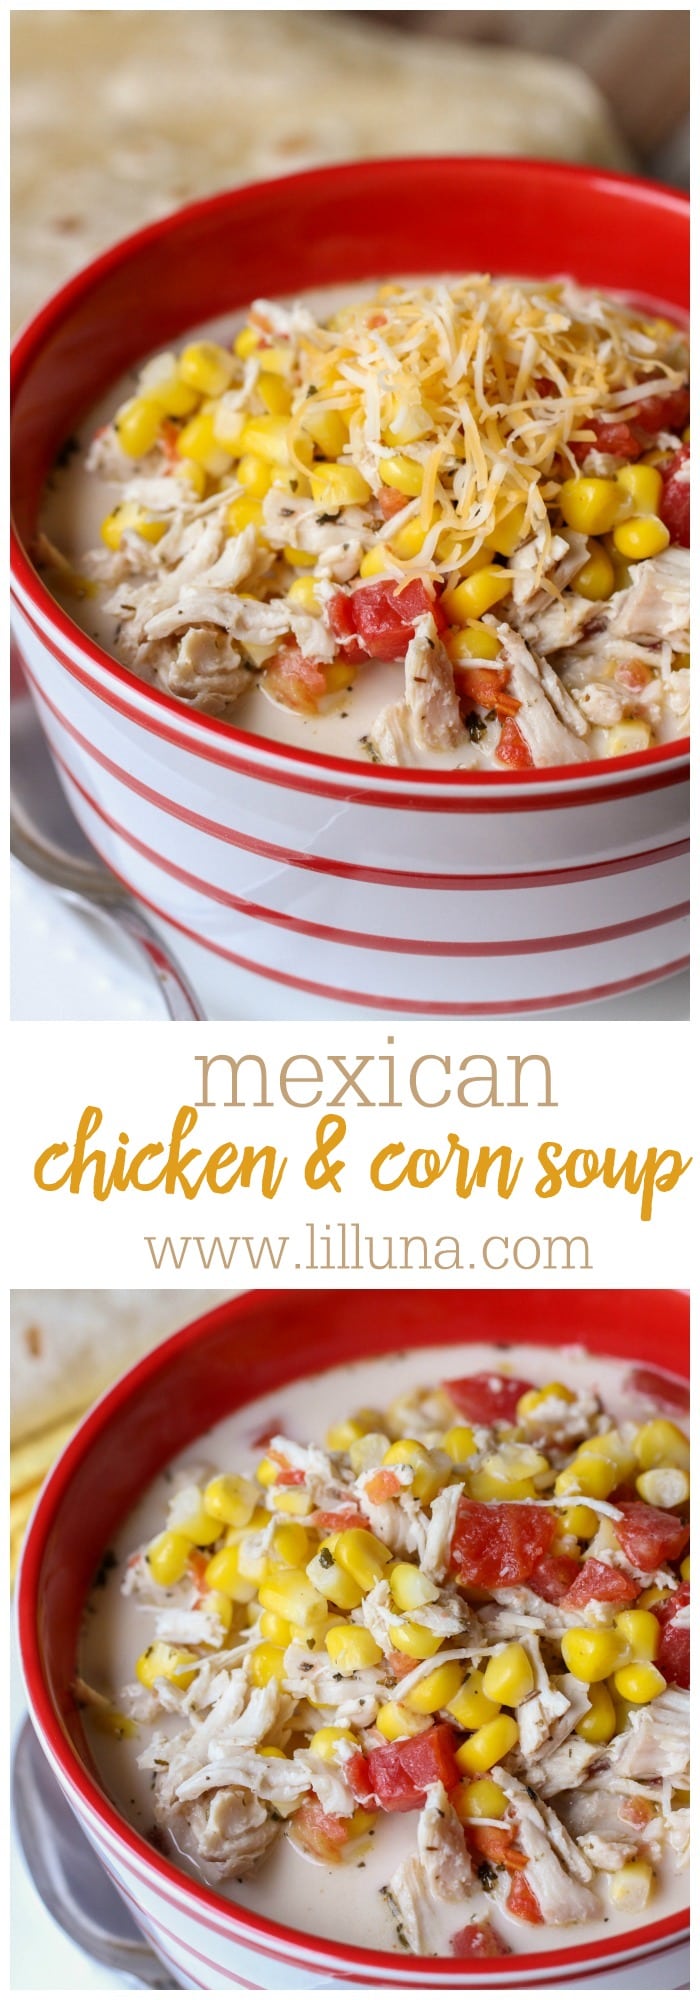 Mexican Chicken Corn Soup - Made in 20 Minutes! | Lil' Luna